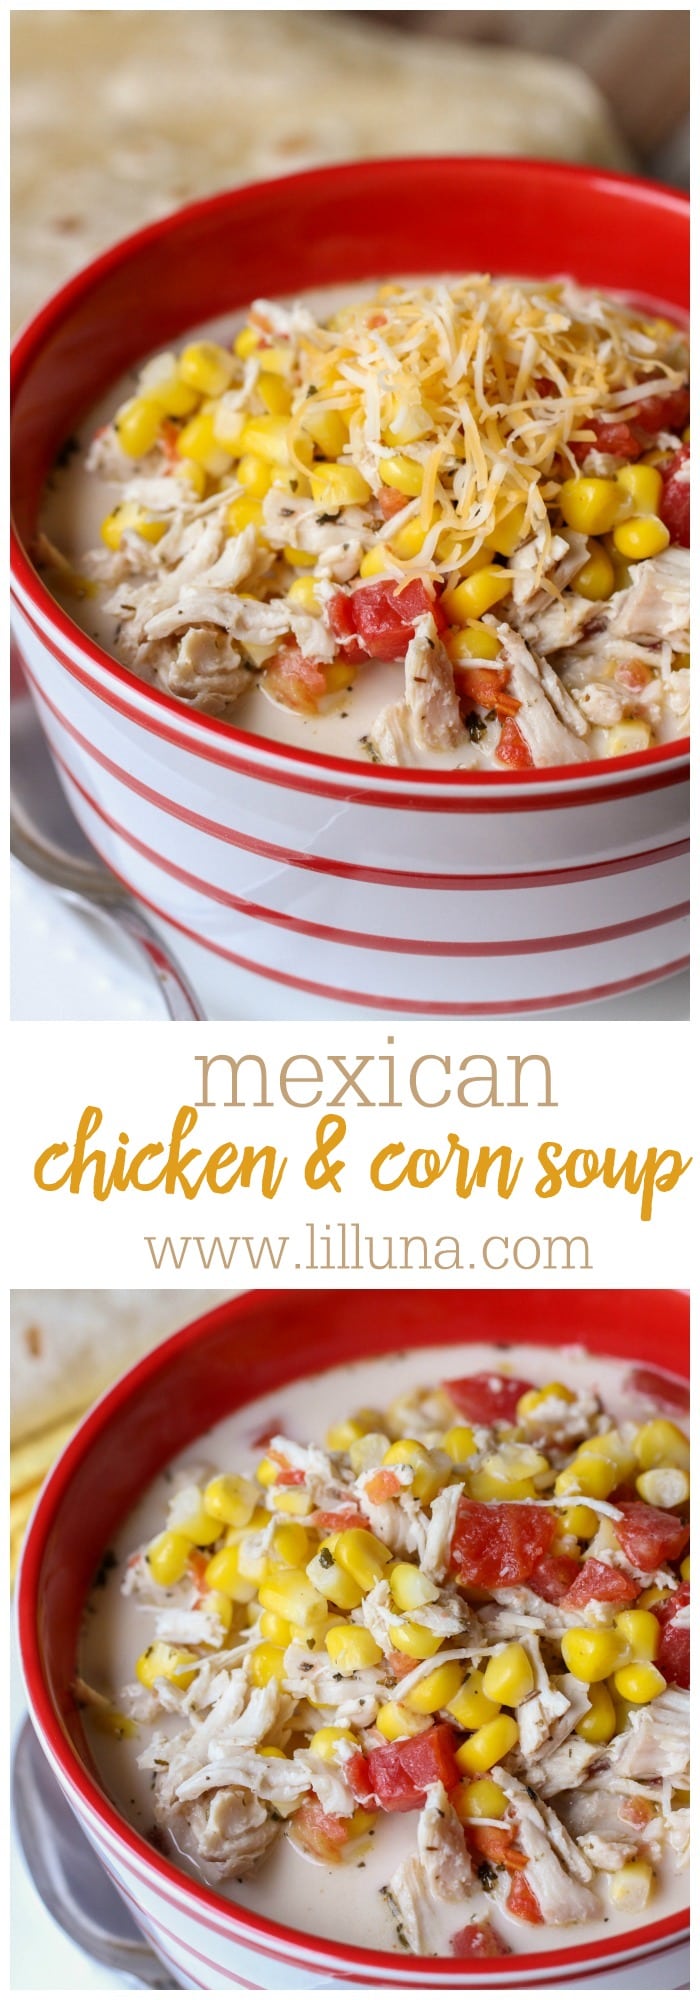 Mexican Chicken Corn Soup - Made in 20 Minutes! | Lil' Luna